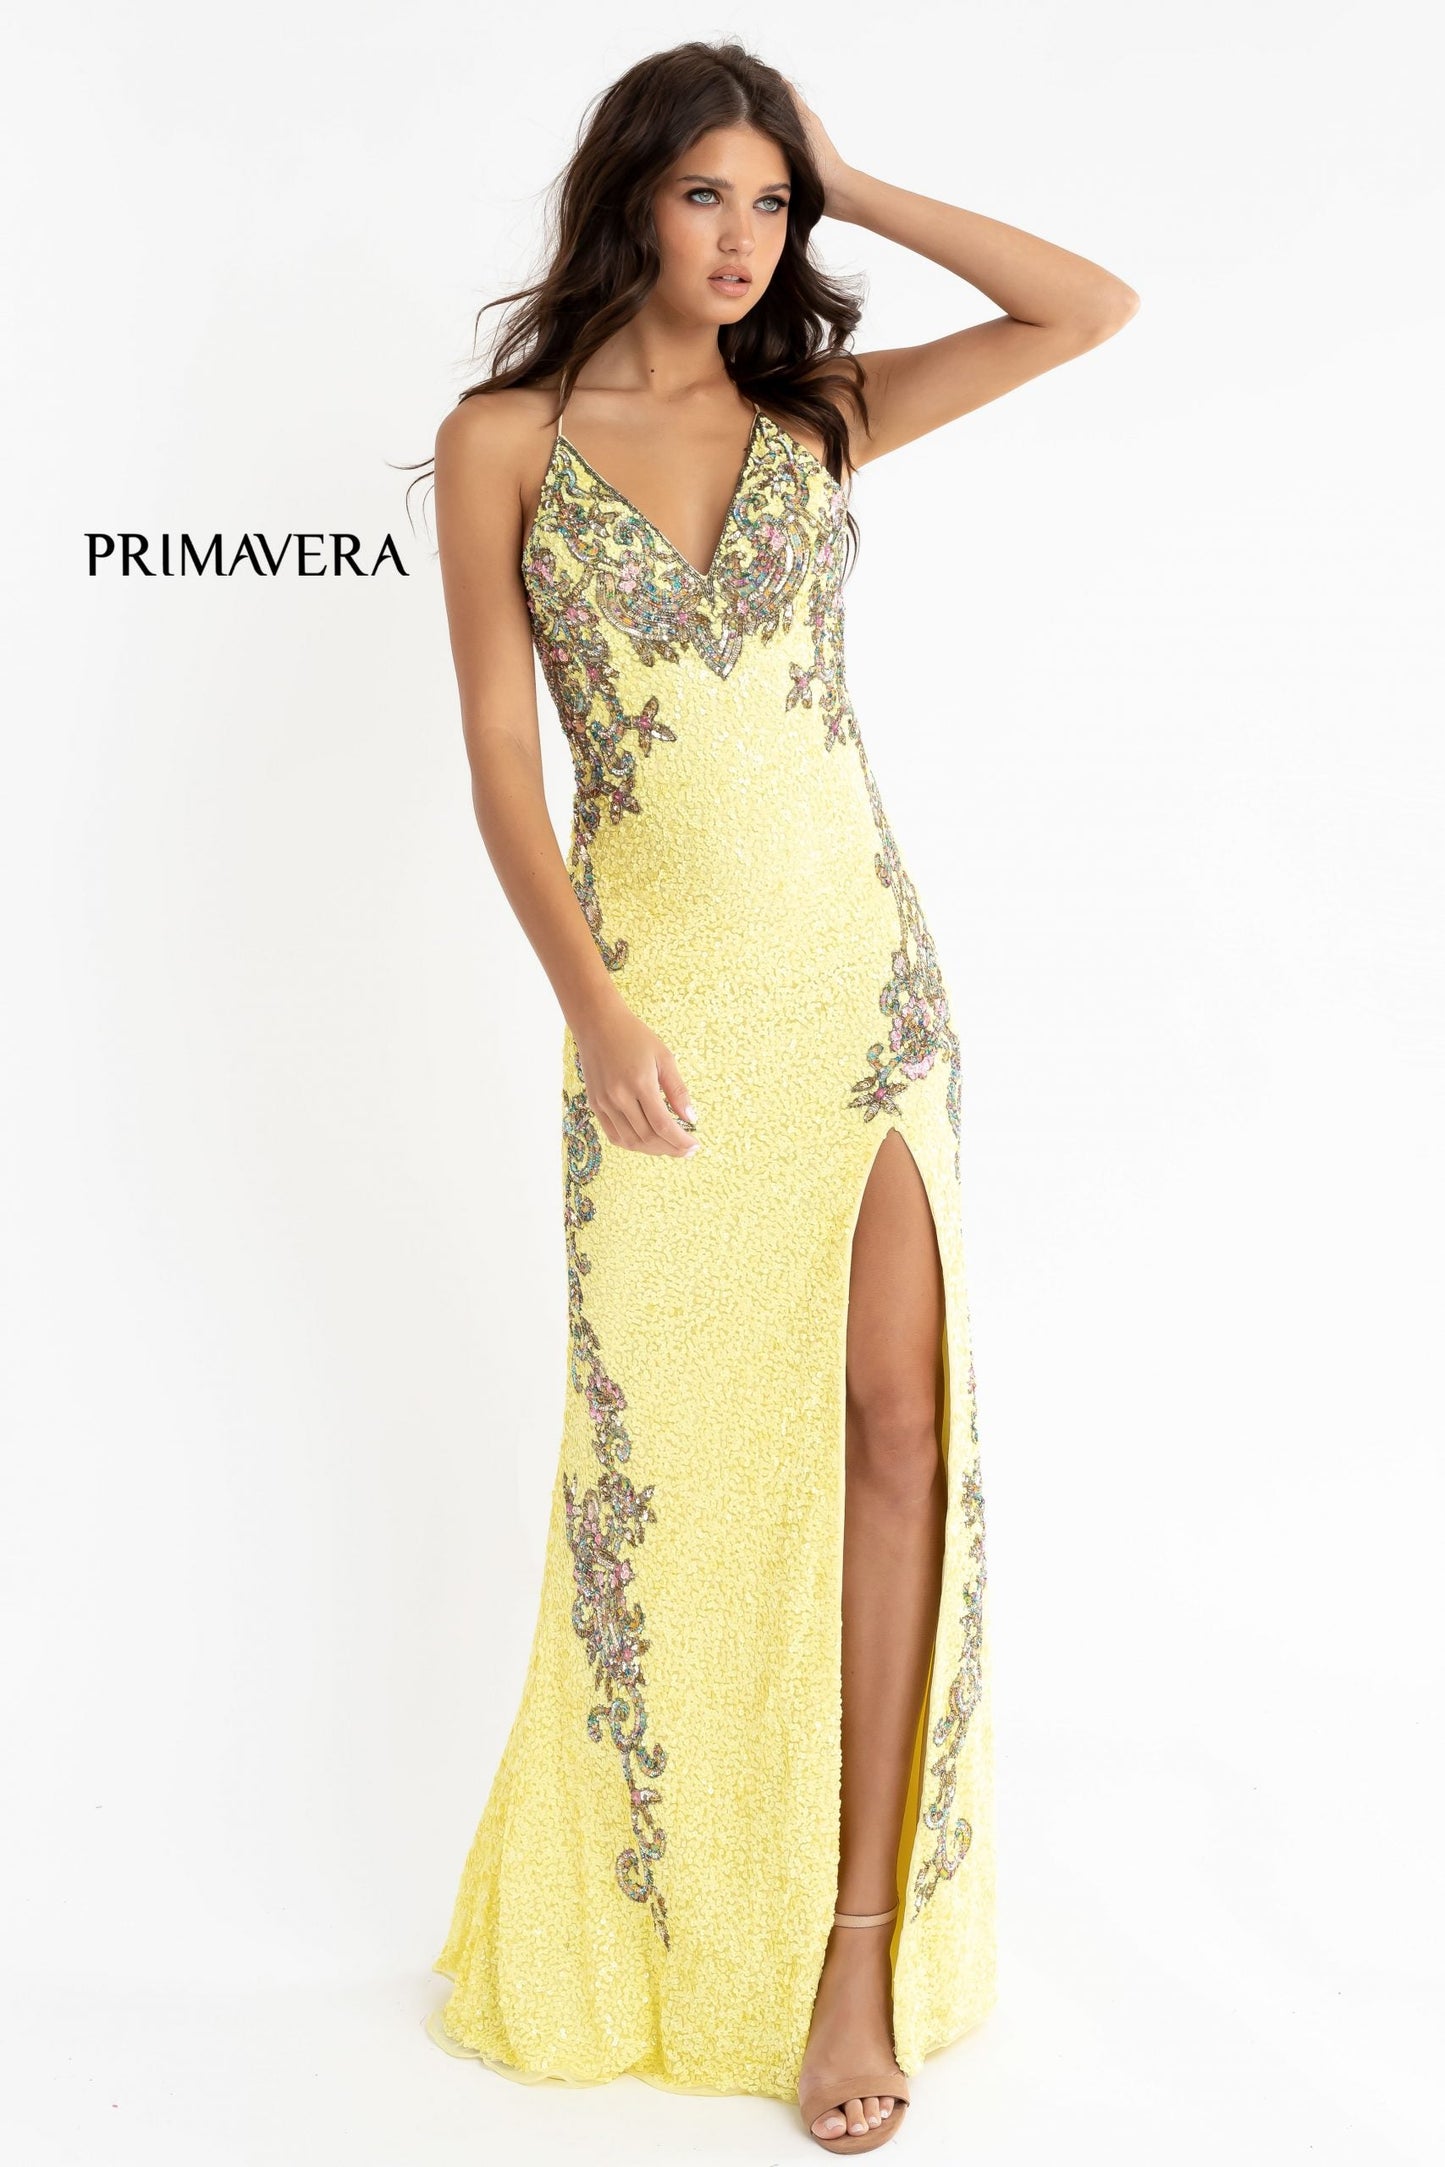 Primavera Couture 3211 Size 2, 12 Ivory Sequin Prom Dress Pageant Gown Evening Formal Wear Side Slit